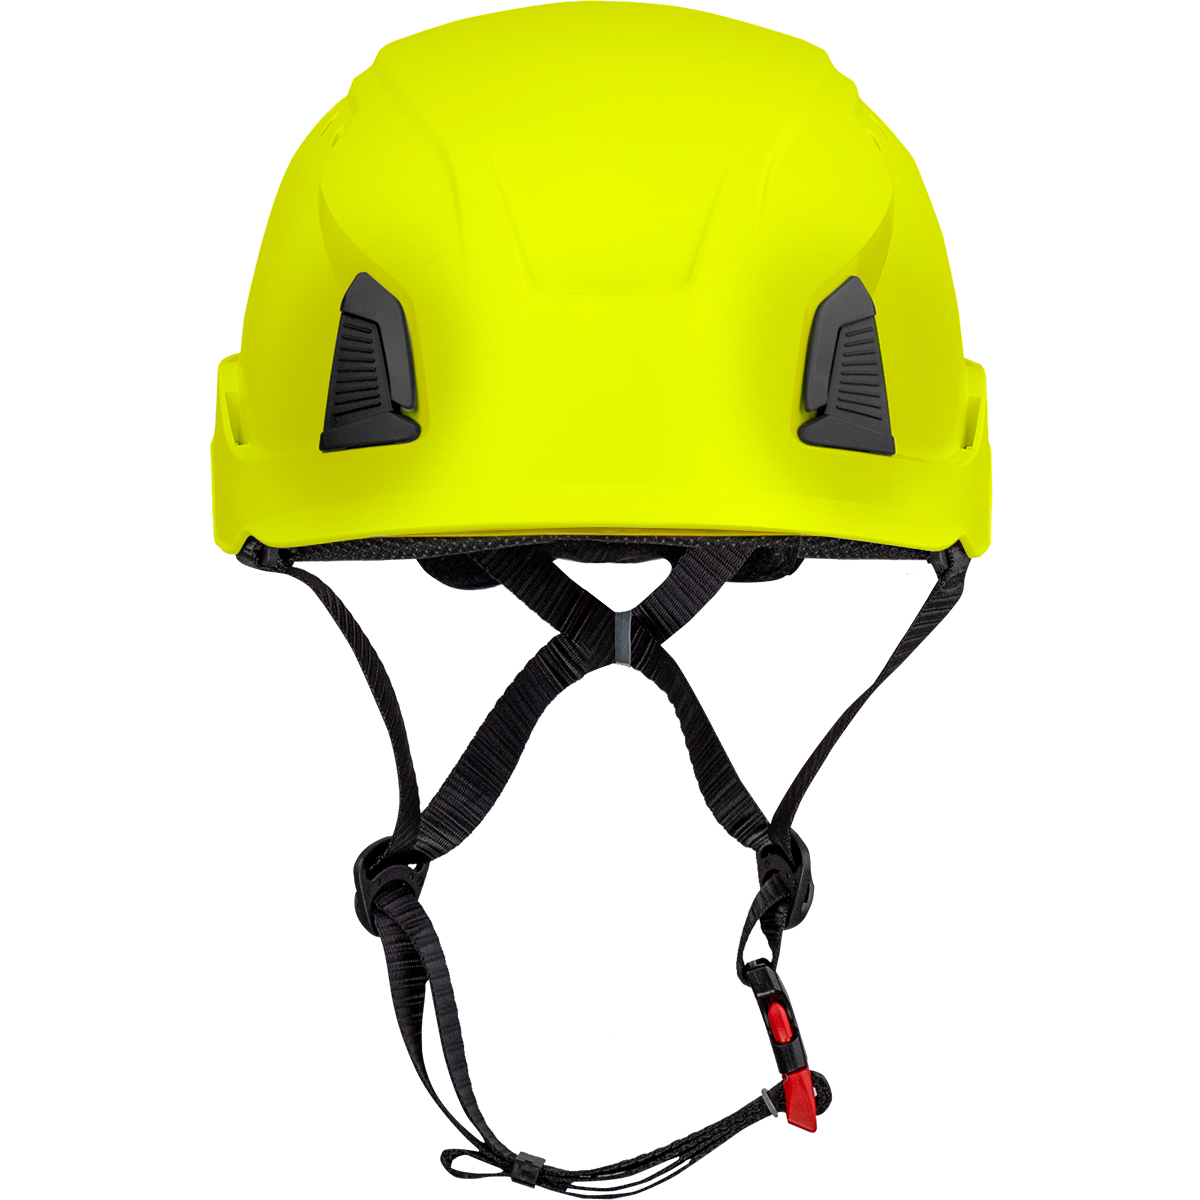 PIP® 280-HP1491RVM-01 Traverse™ Vented, Industrial Climbing Helmet with Mips® Technology, Polycarbonate/ABS Shell, EPS Foam Impact Liner, HDPE Suspension, Wheel Ratchet Adjustment and 4-Point Chin Strap, Hi-Vis Yellow